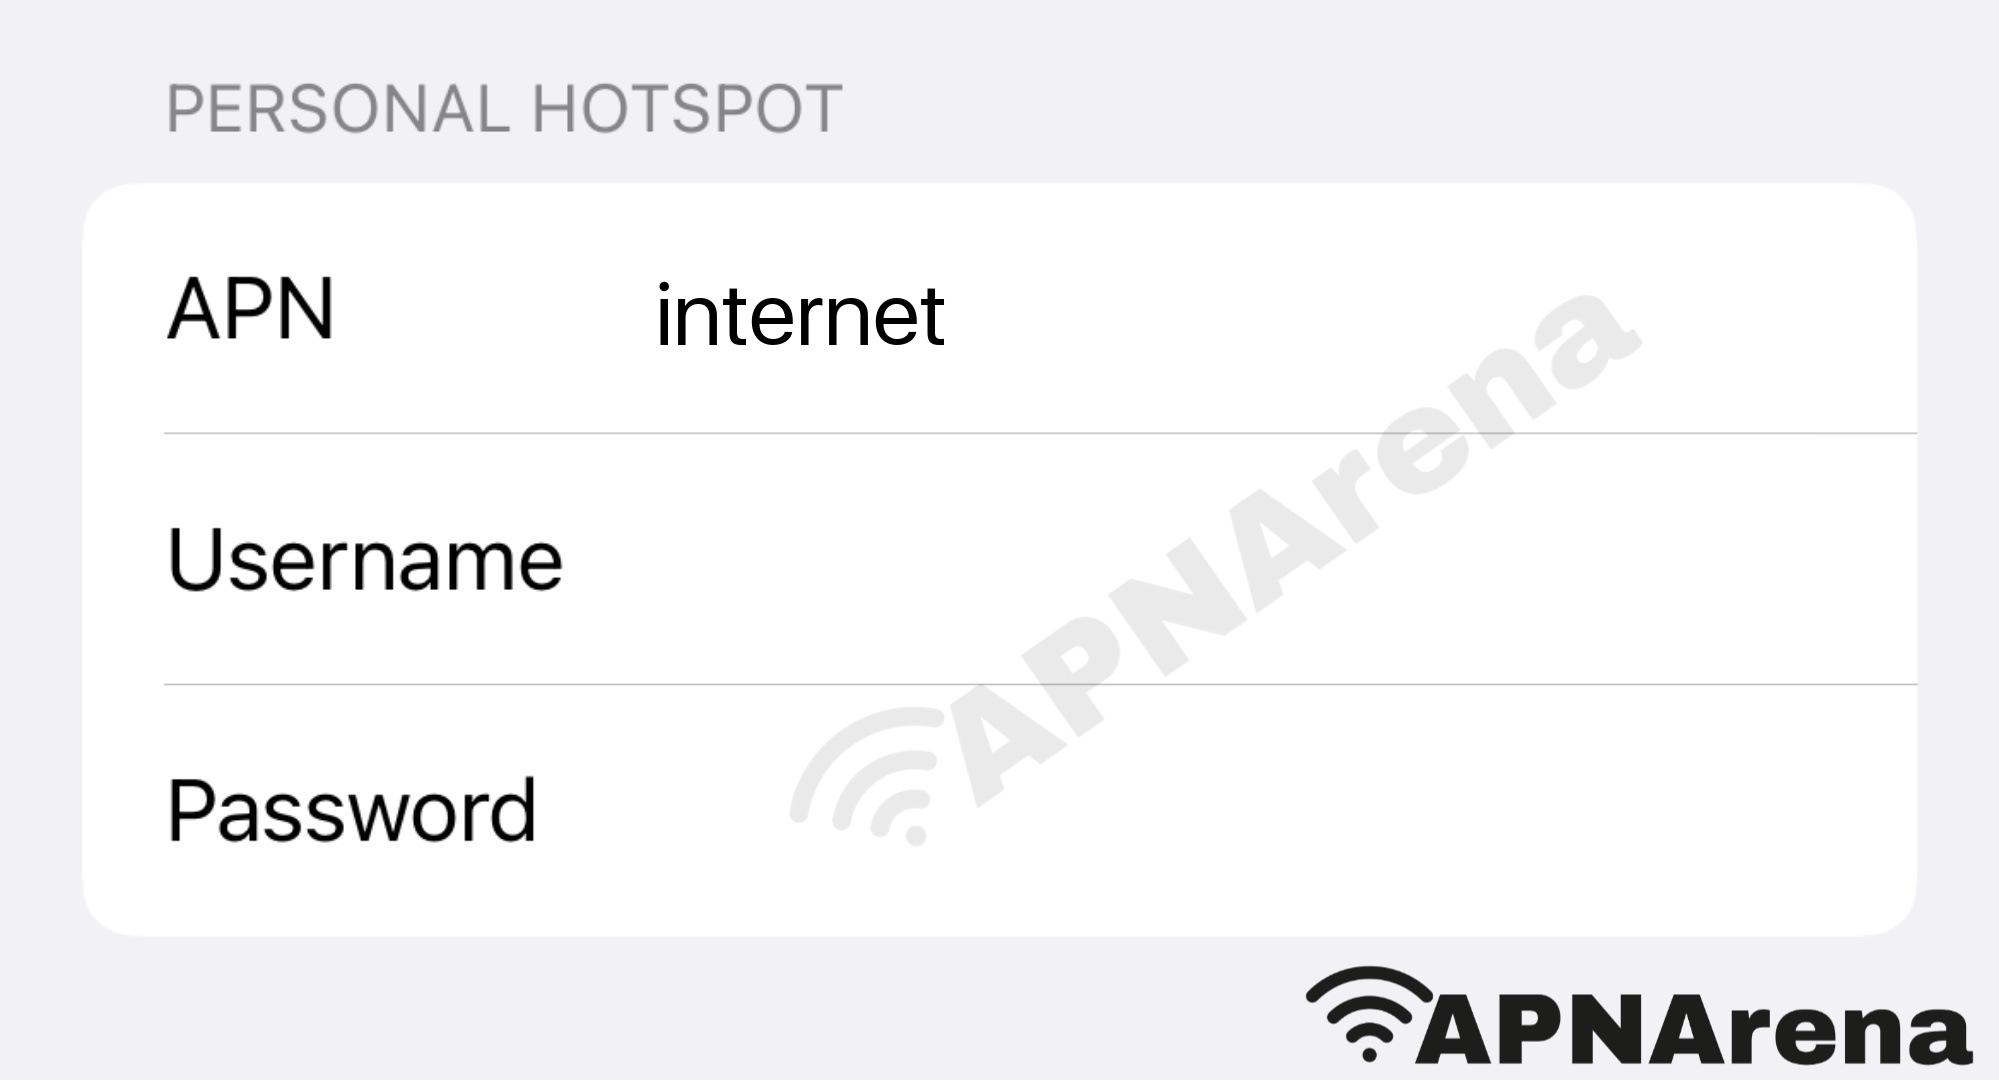 BT Onephone (BTOP) Personal Hotspot Settings for iPhone